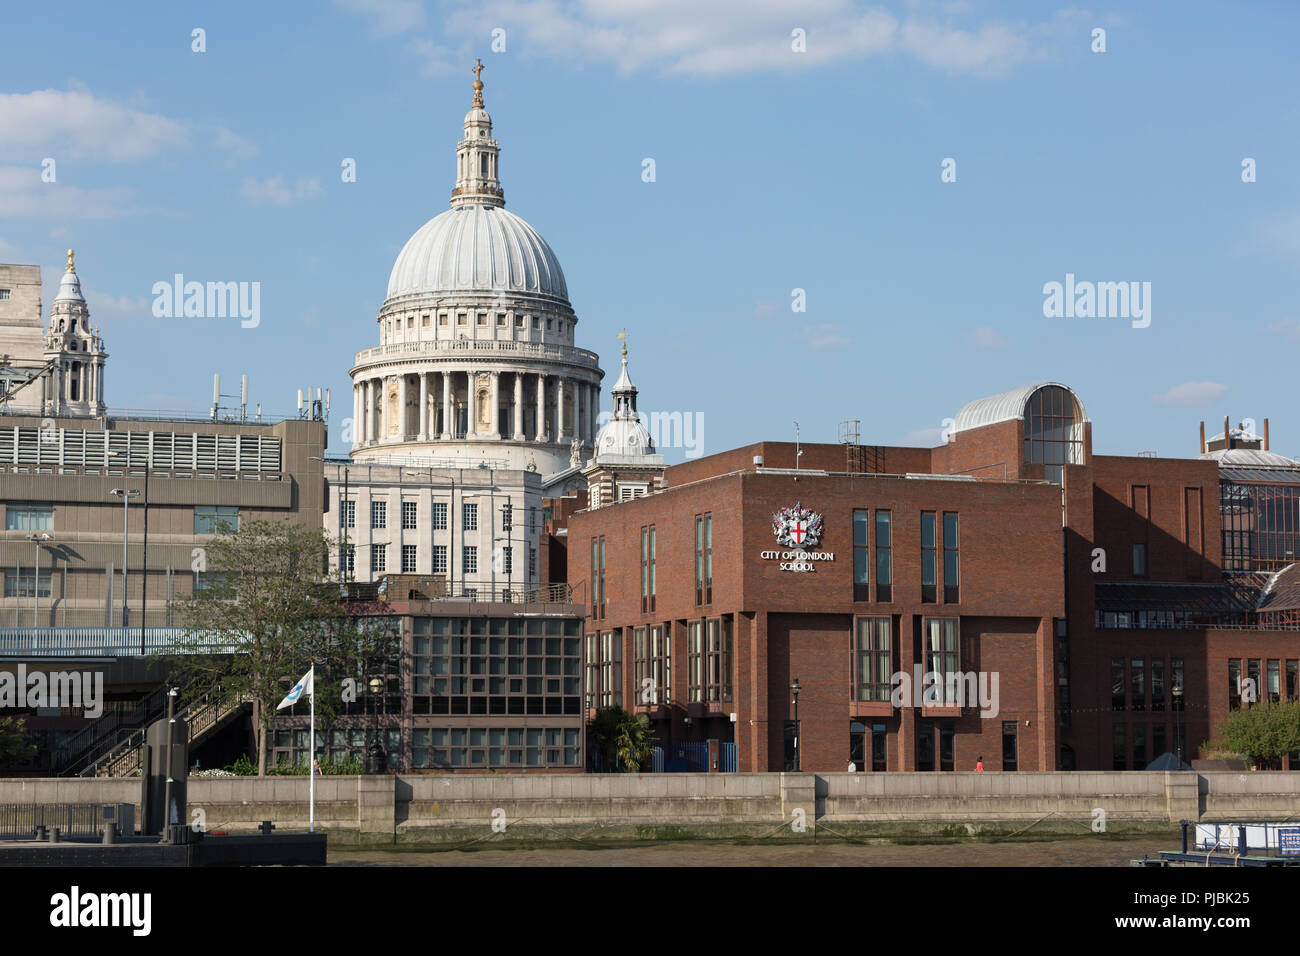 The Millenium Bridge and St Paul's Cathedral, London UK Stock Photo